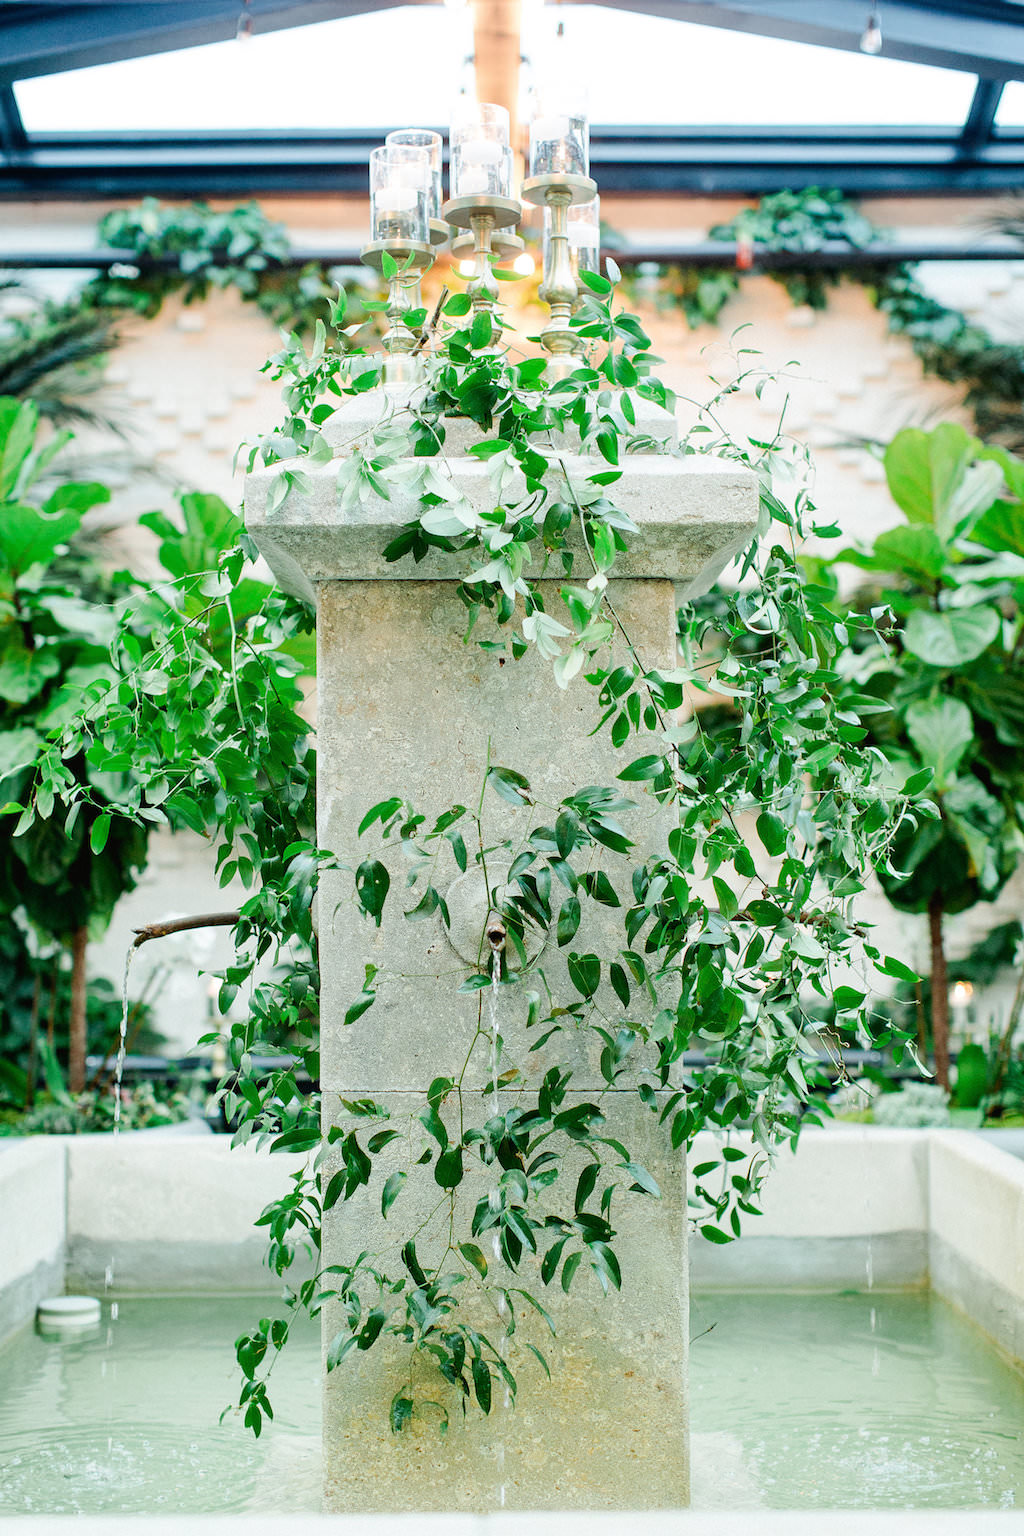 Atrium Wedding Reception Fountain with Greenery at Downtown Tampa Historic Wedding Venue The Oxford Exchange